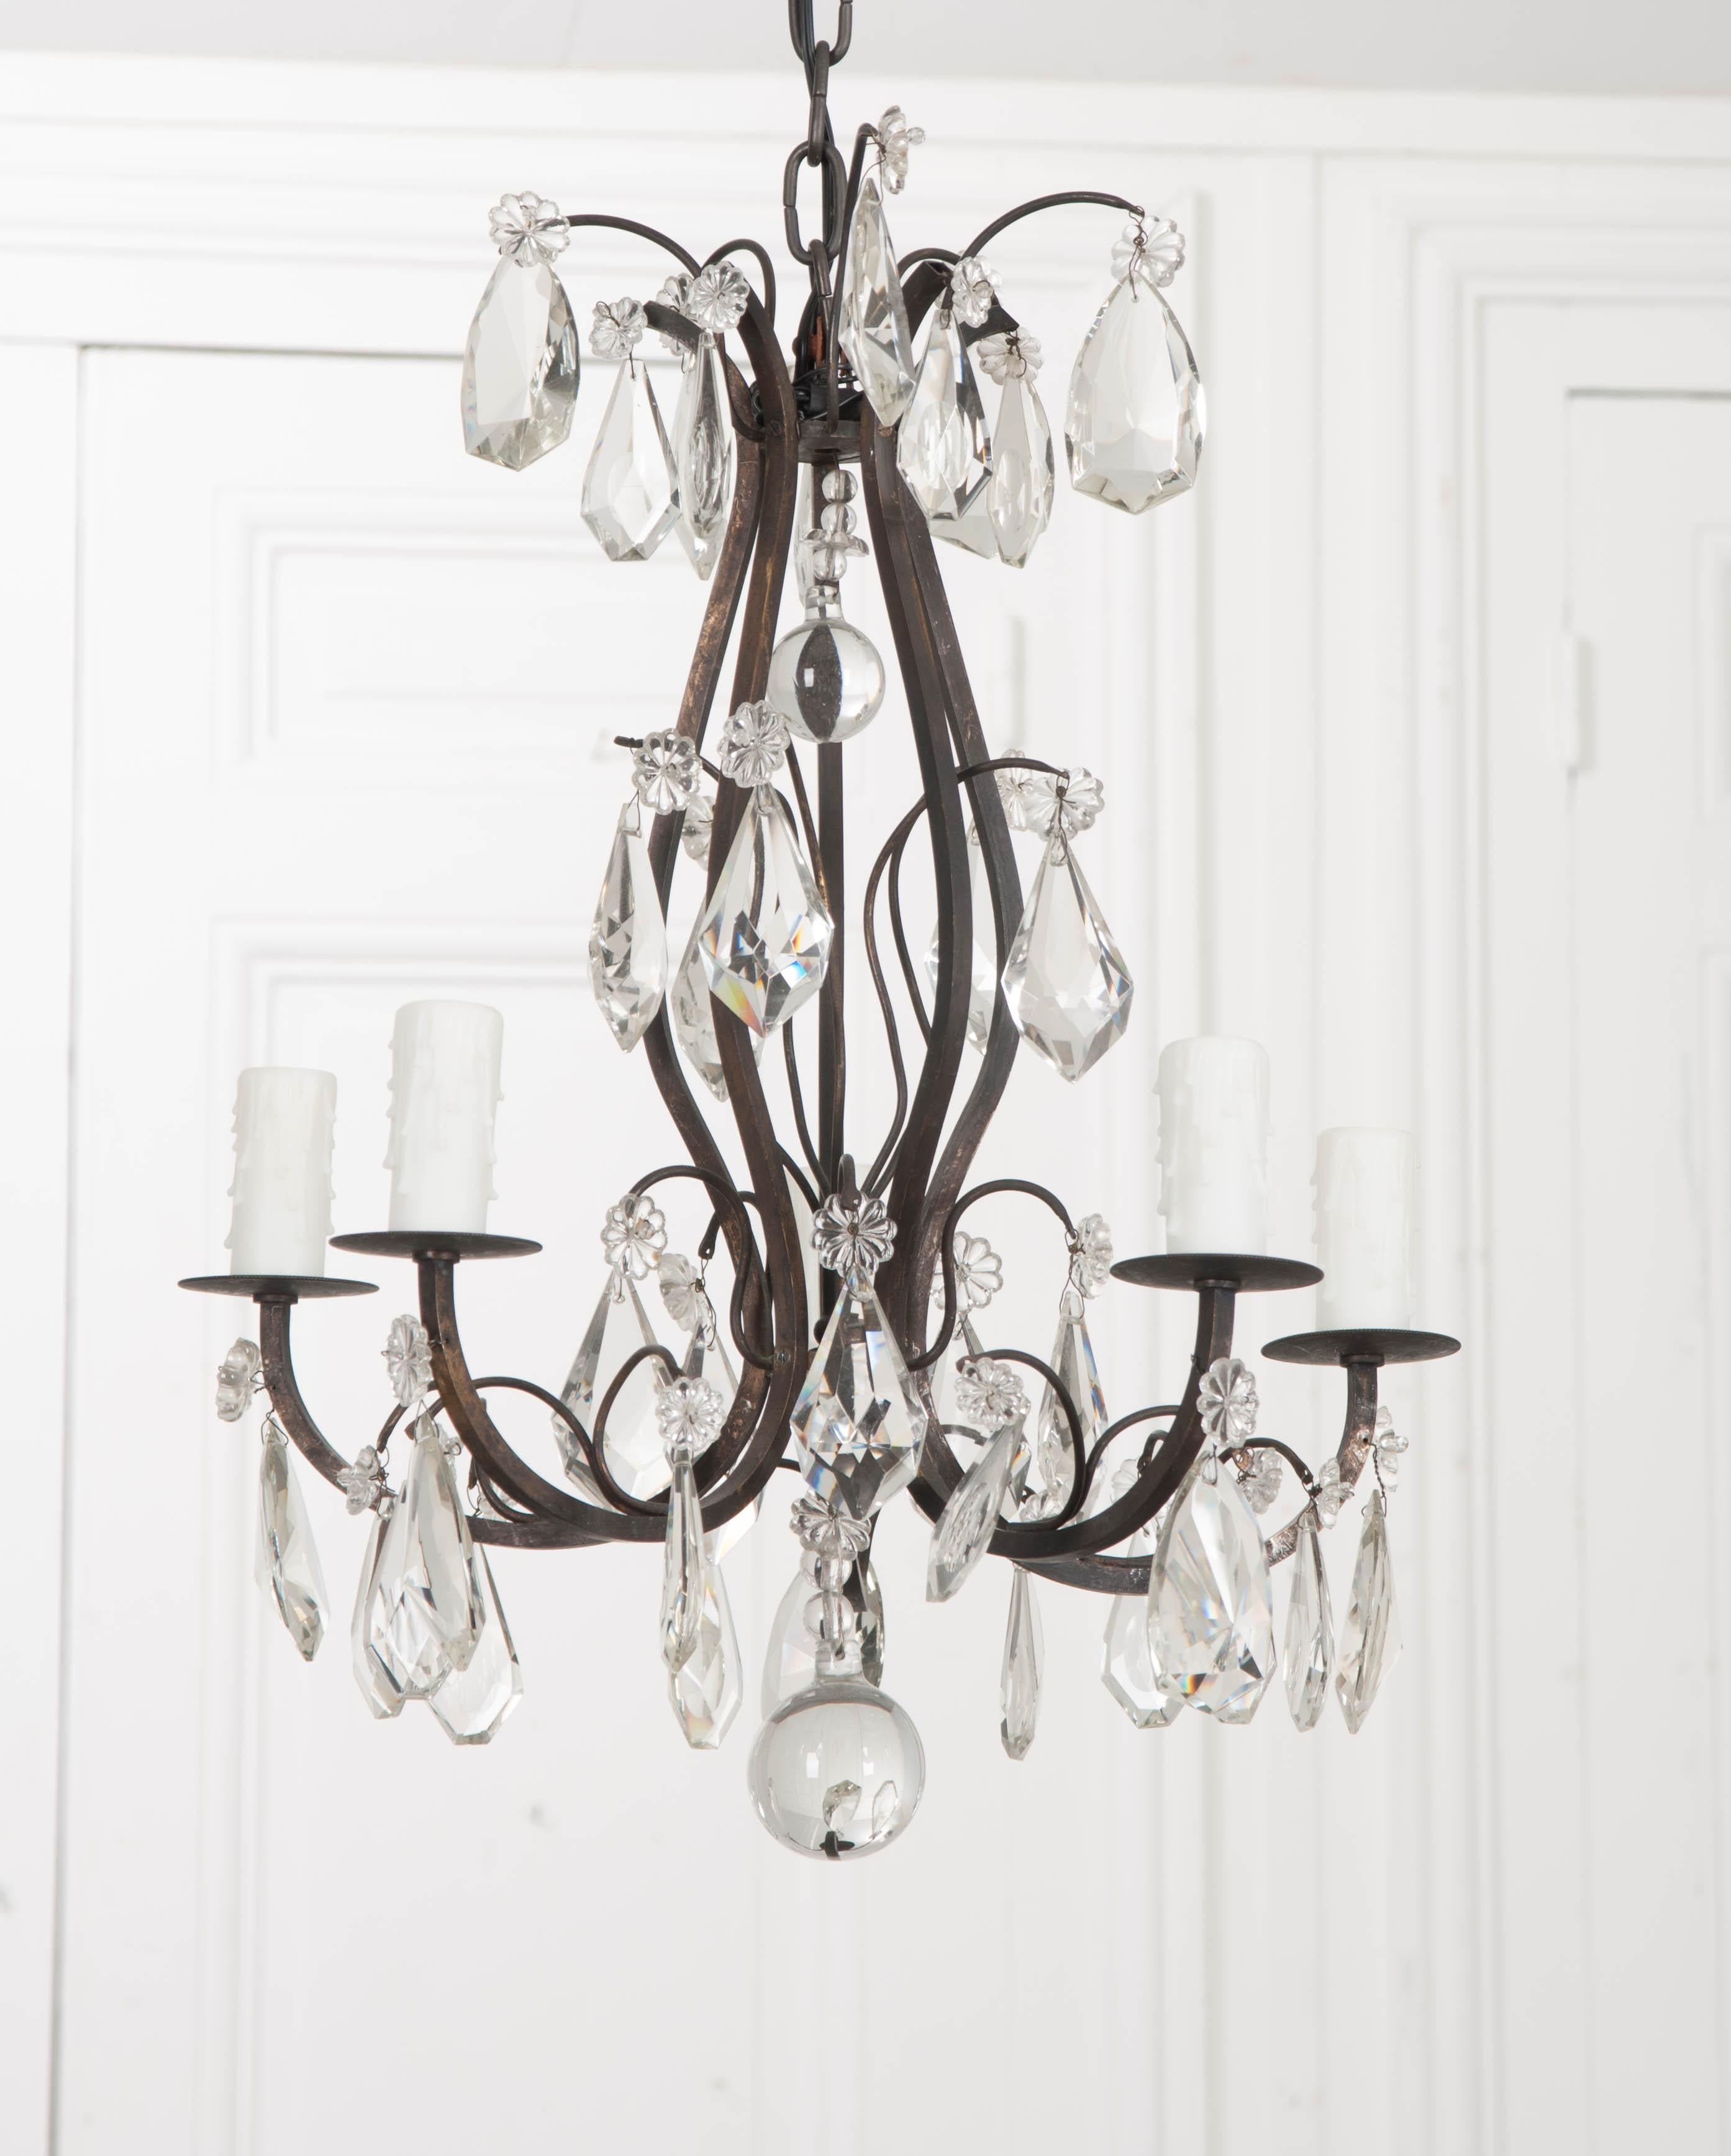 A petite 19th century chandelier, made of metal and crystals in France. The beautiful fixture sports five lights set atop metal bobeches found at each arm’s end. Dazzling cut crystals are suspended from the frame with two drop balls prominently hung